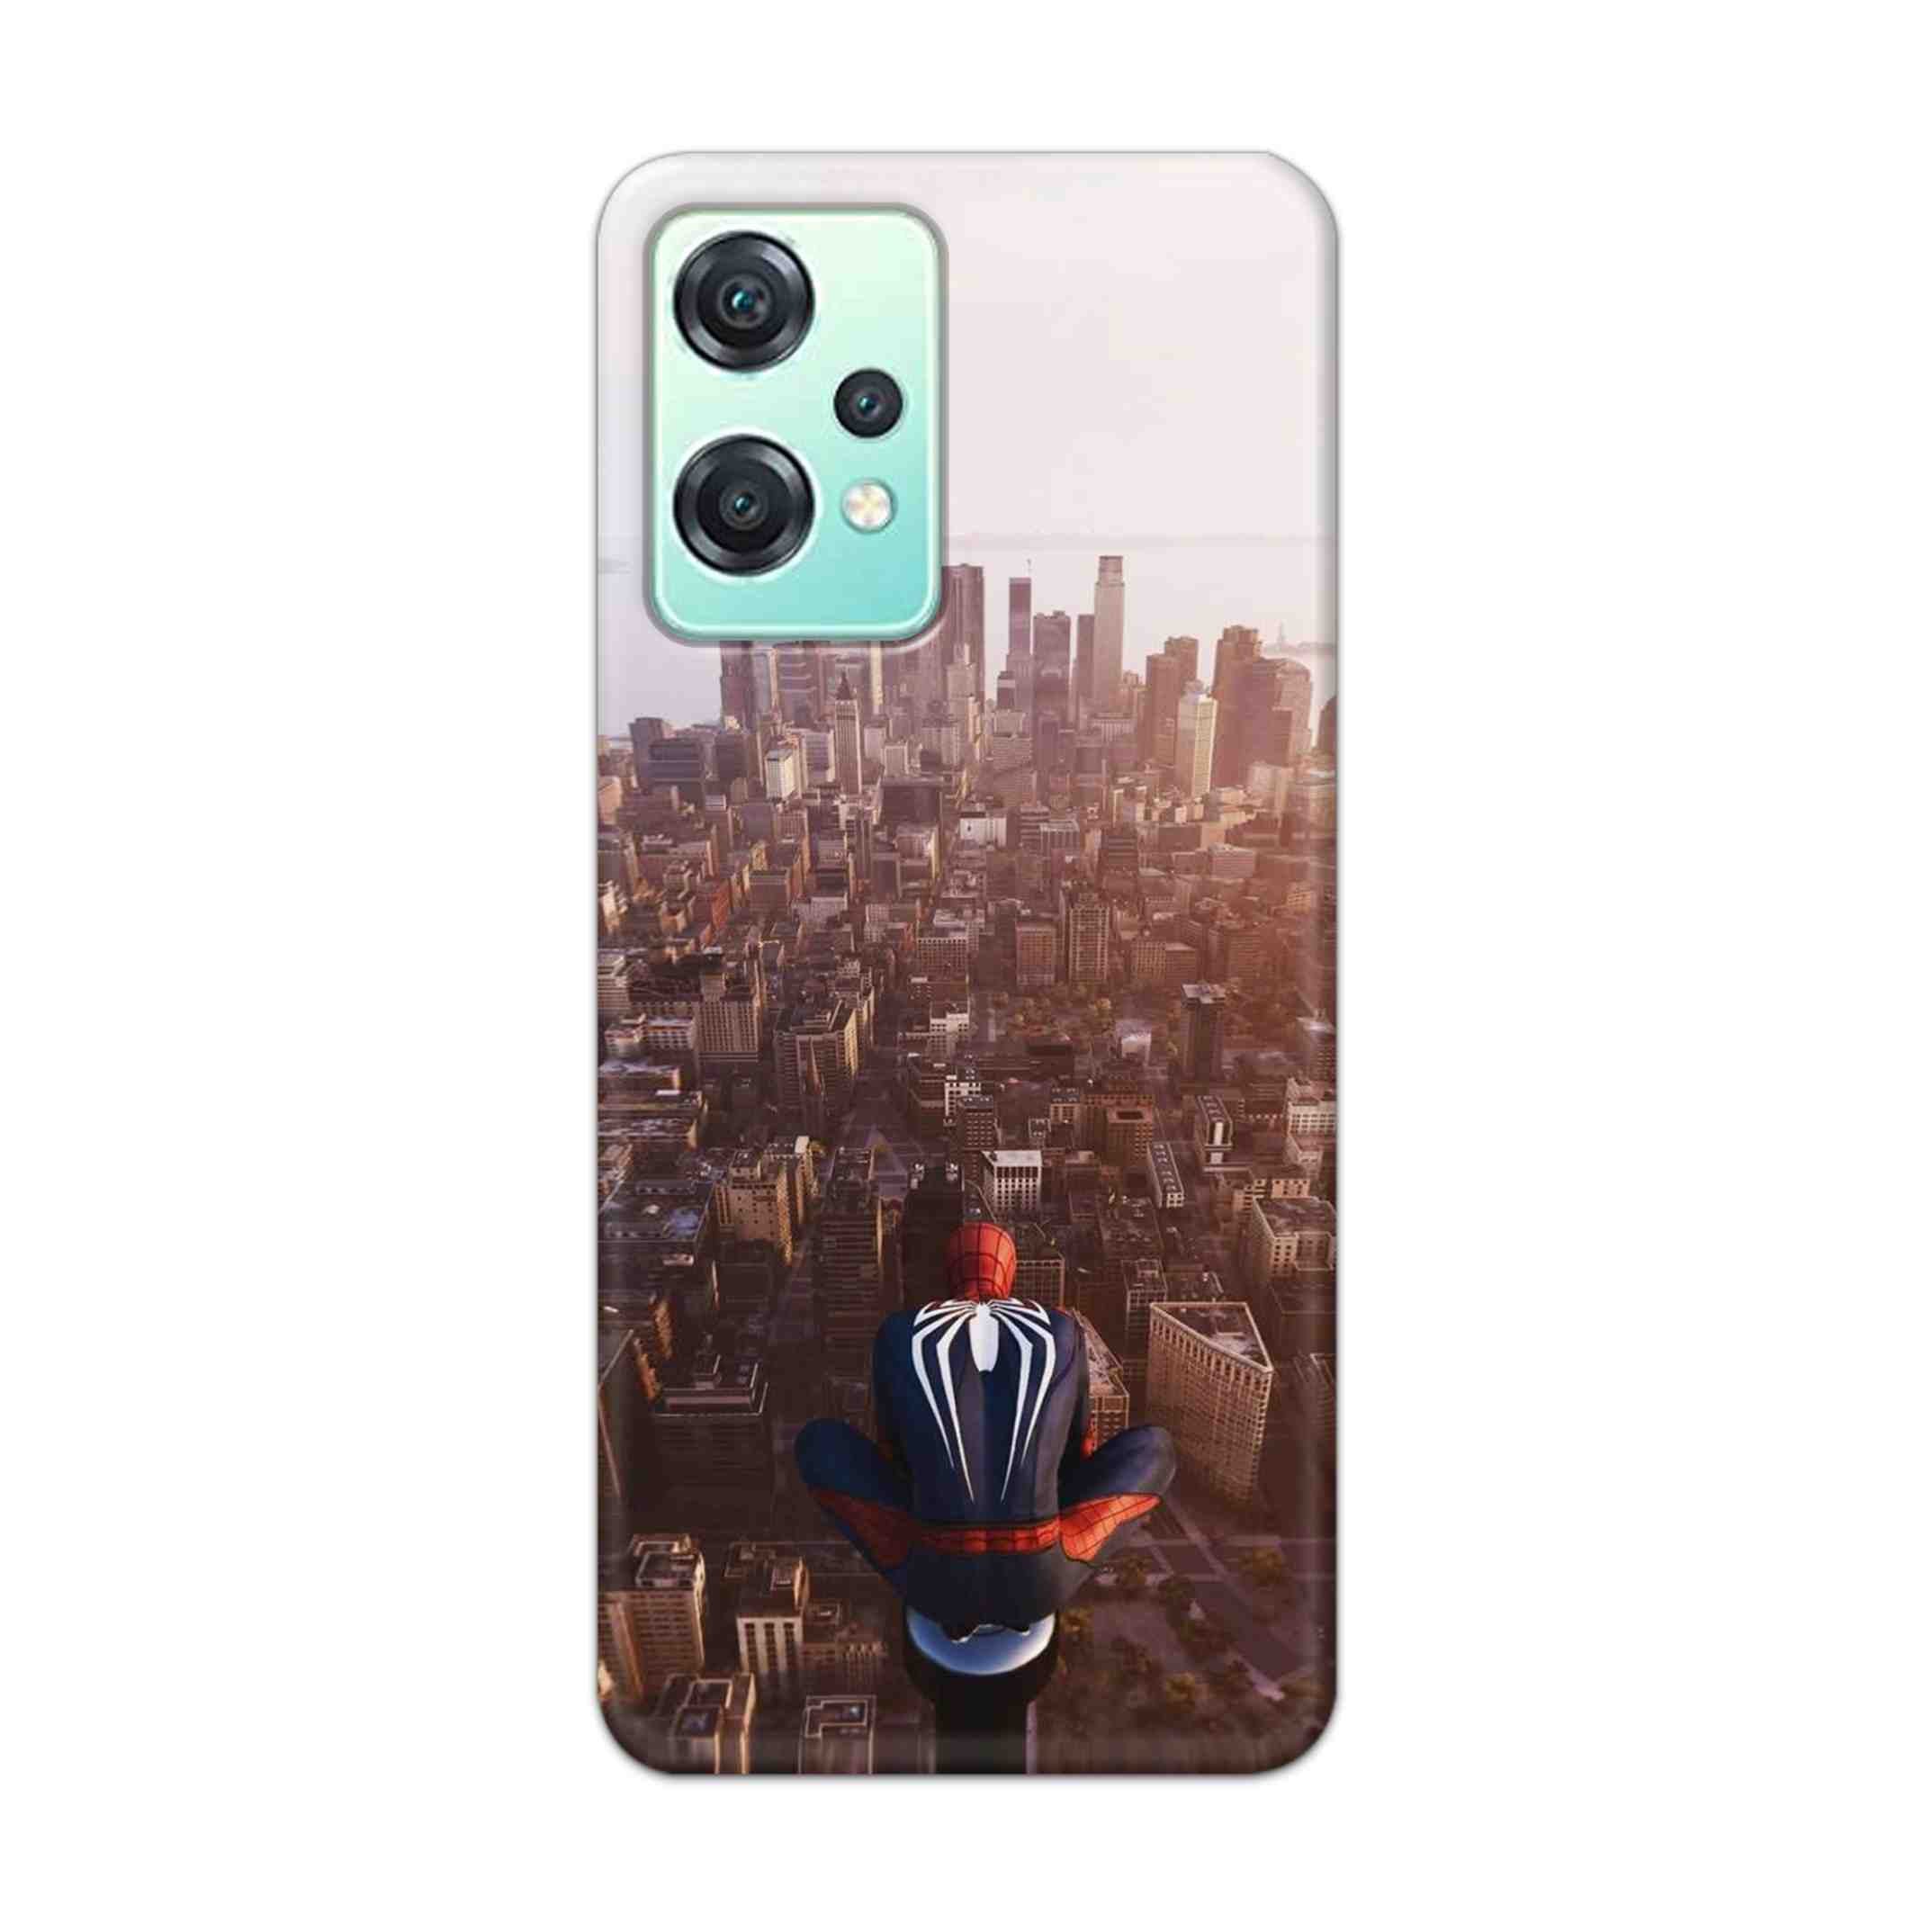 Buy City Of Spiderman Hard Back Mobile Phone Case Cover For OnePlus Nord CE 2 Lite 5G Online